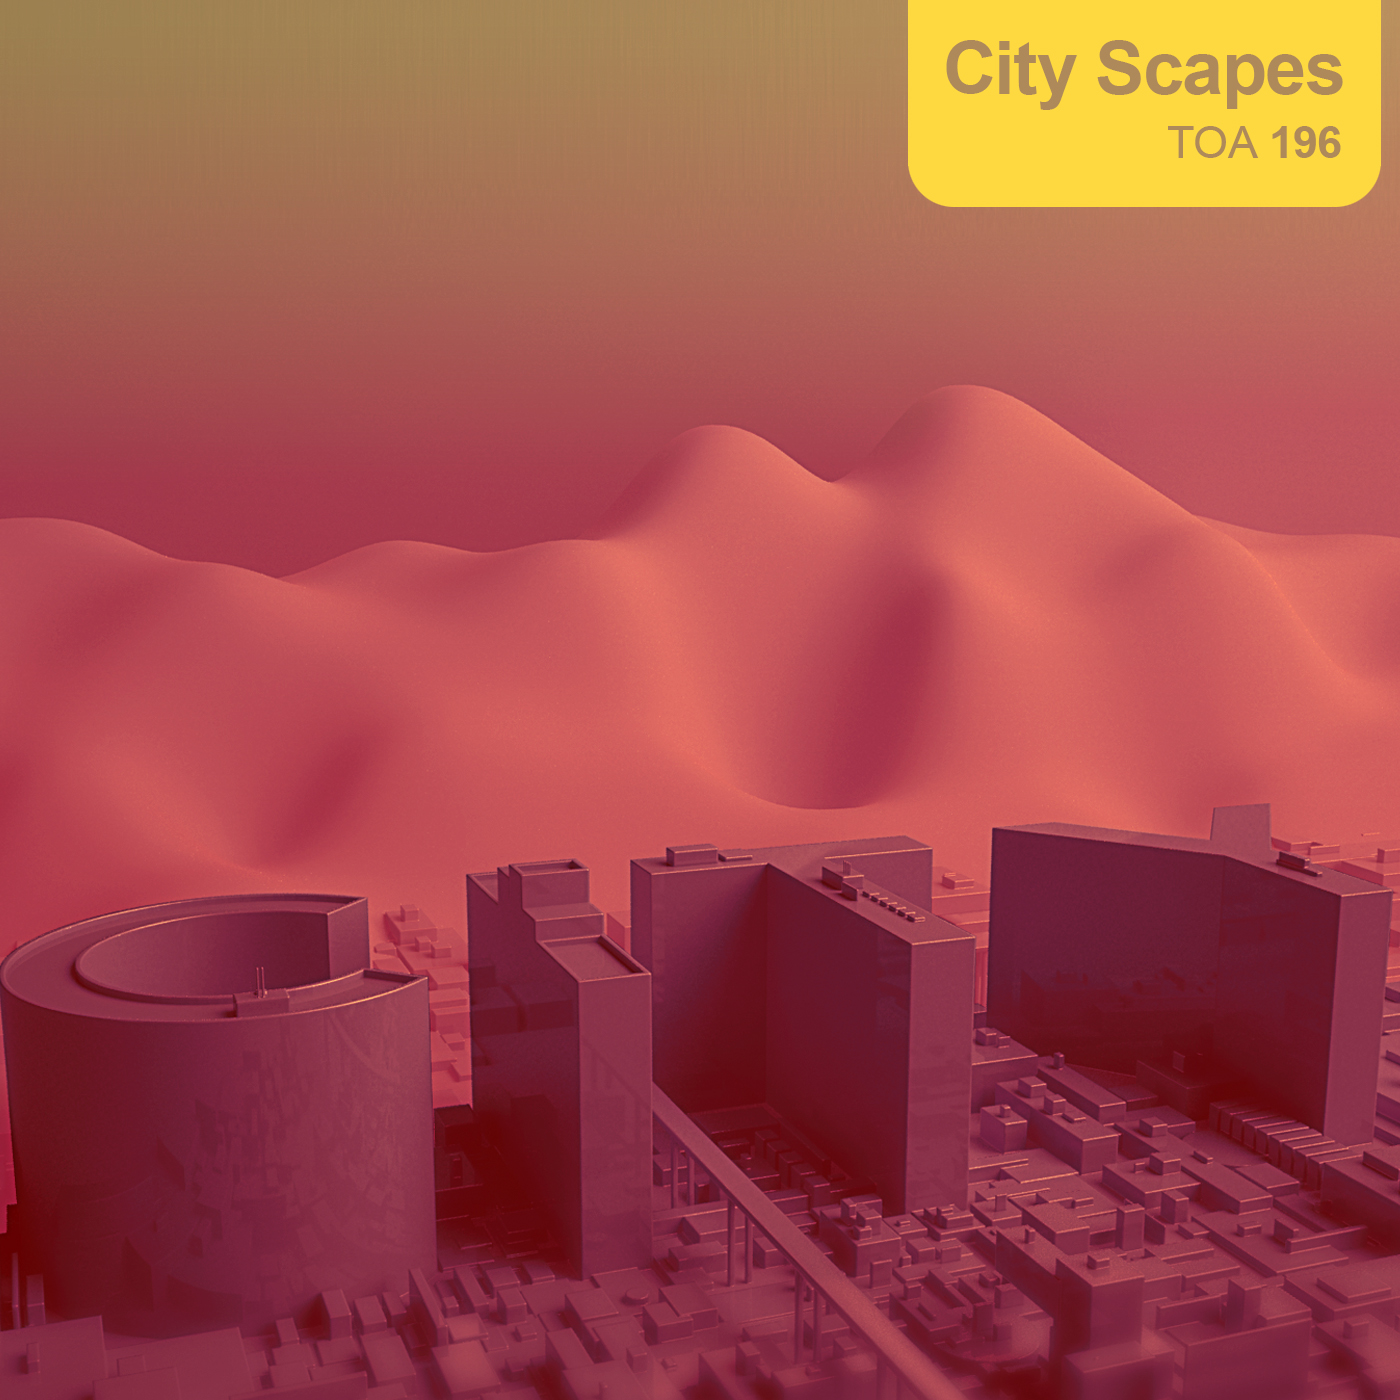 CityScapes